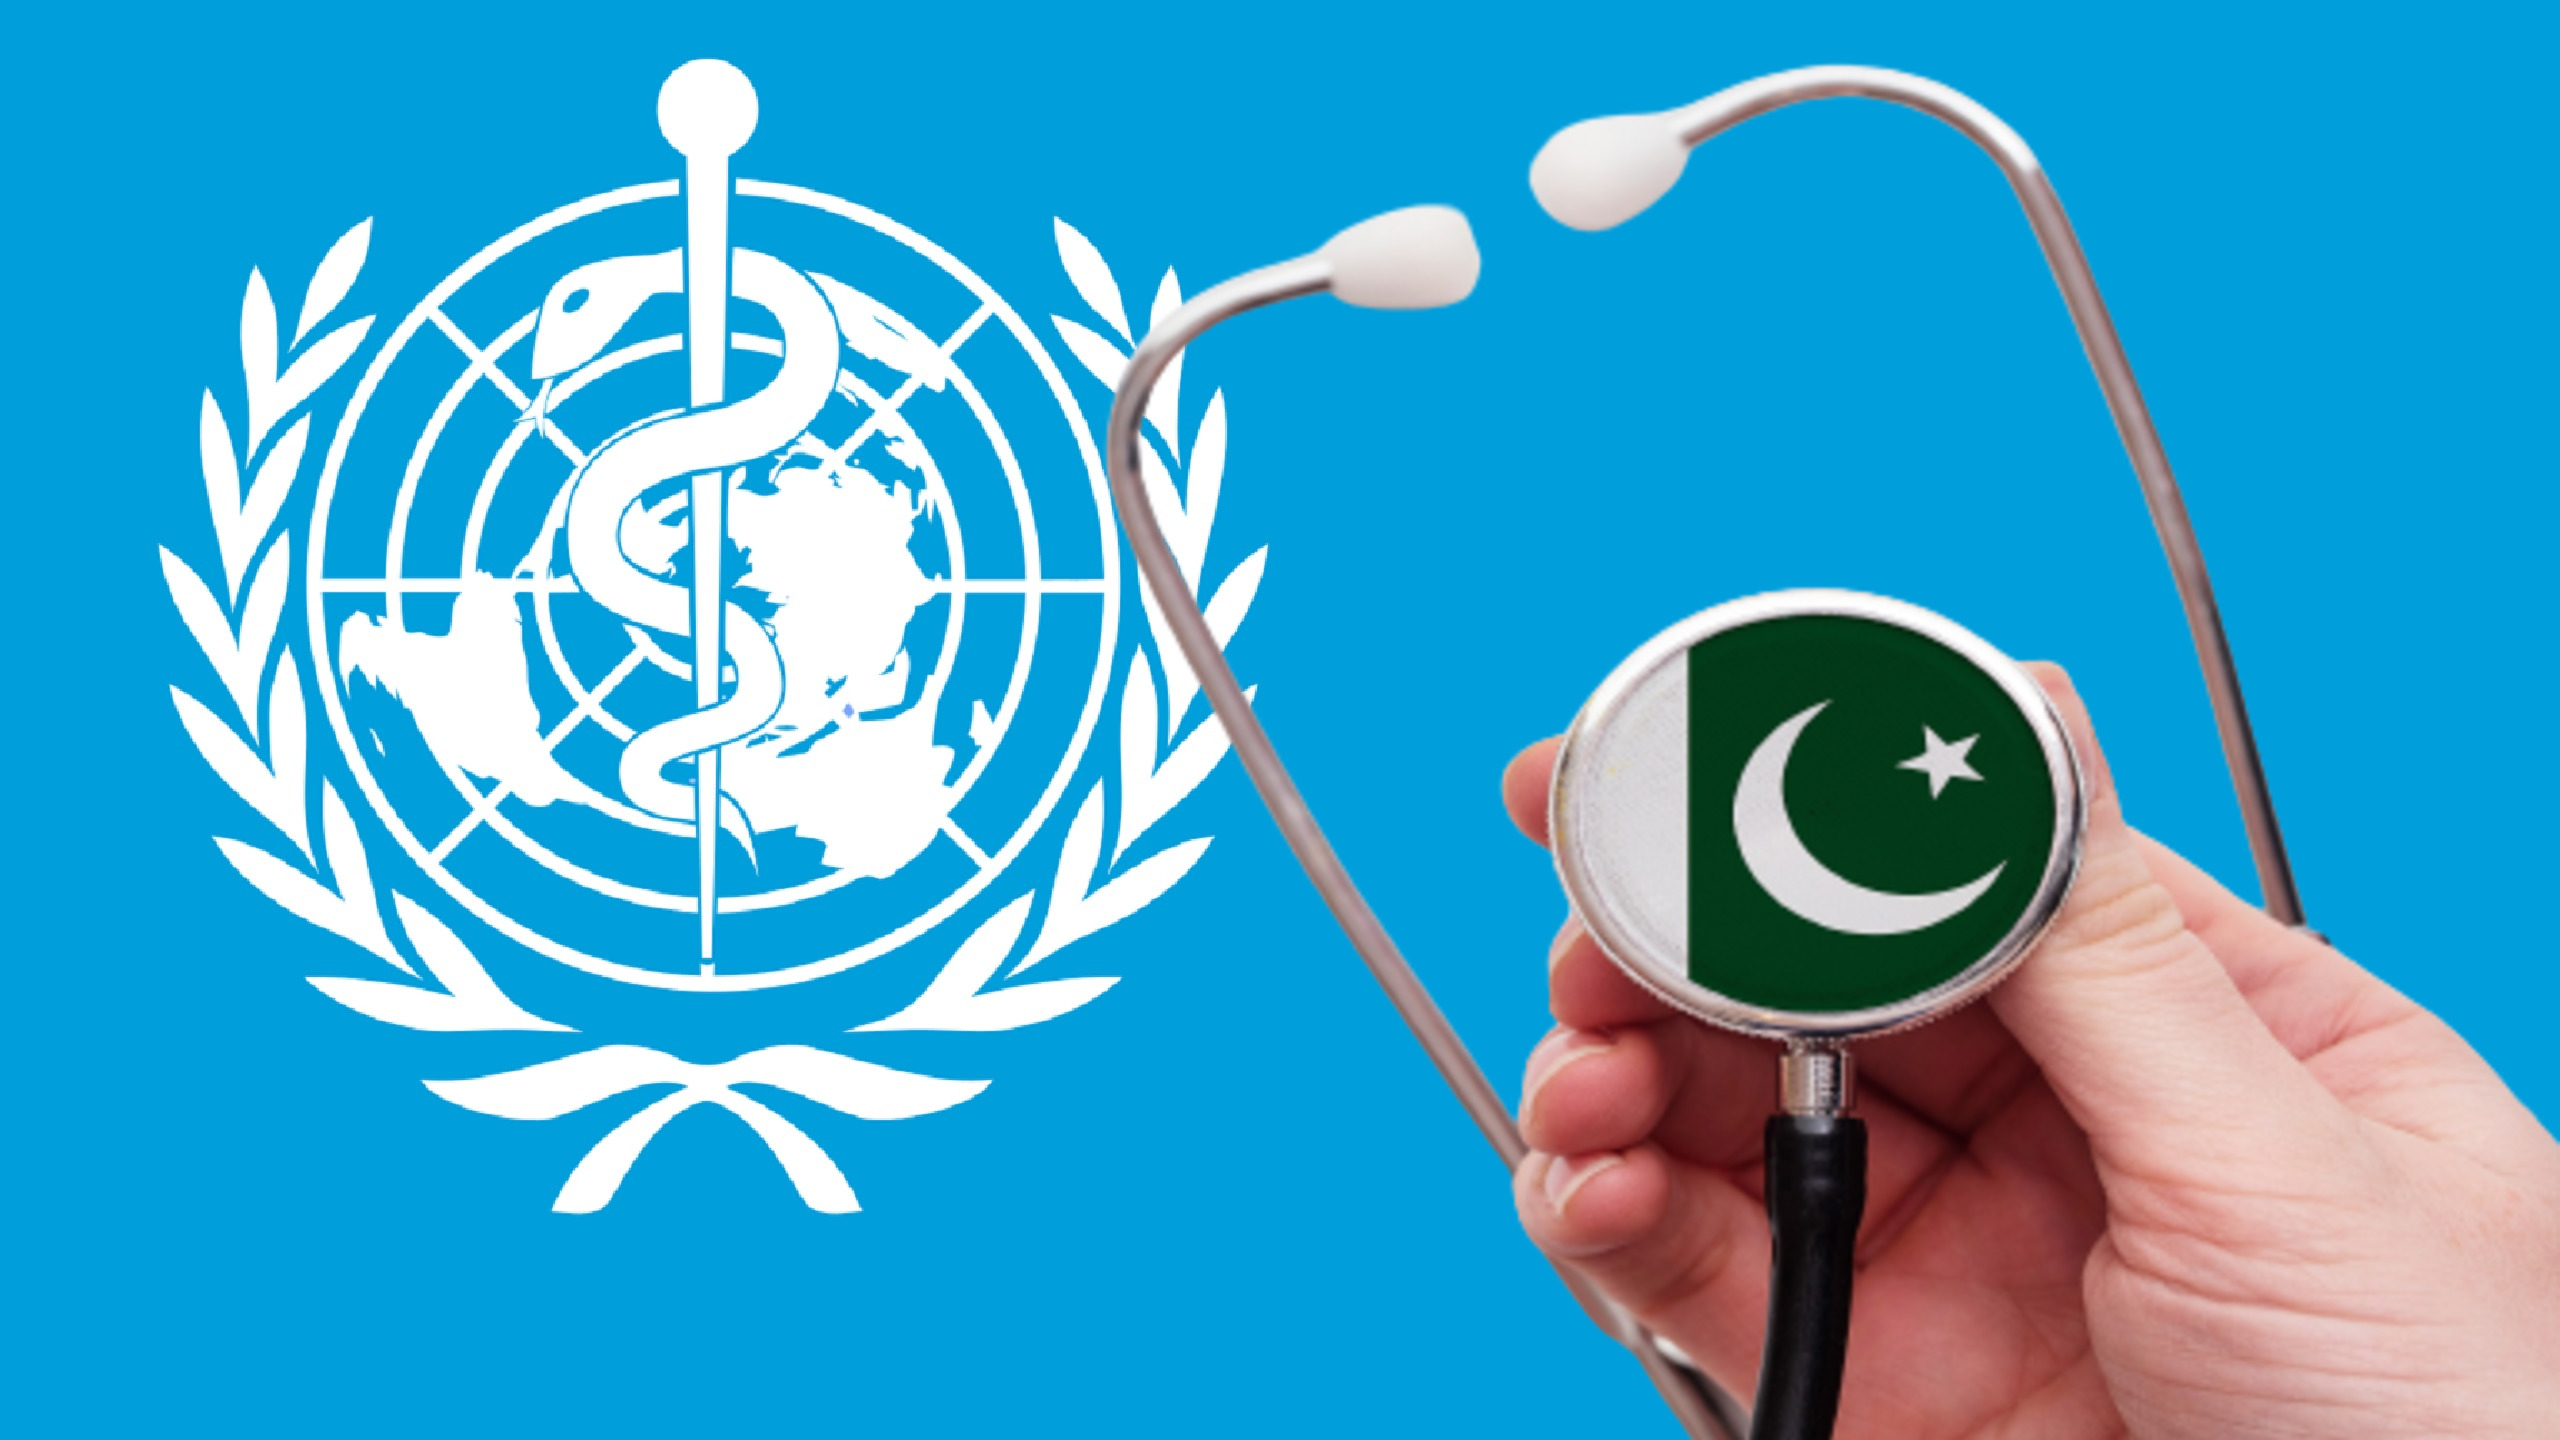 WHO, Pakistan Join Forces To Boost Universal Health Coverage